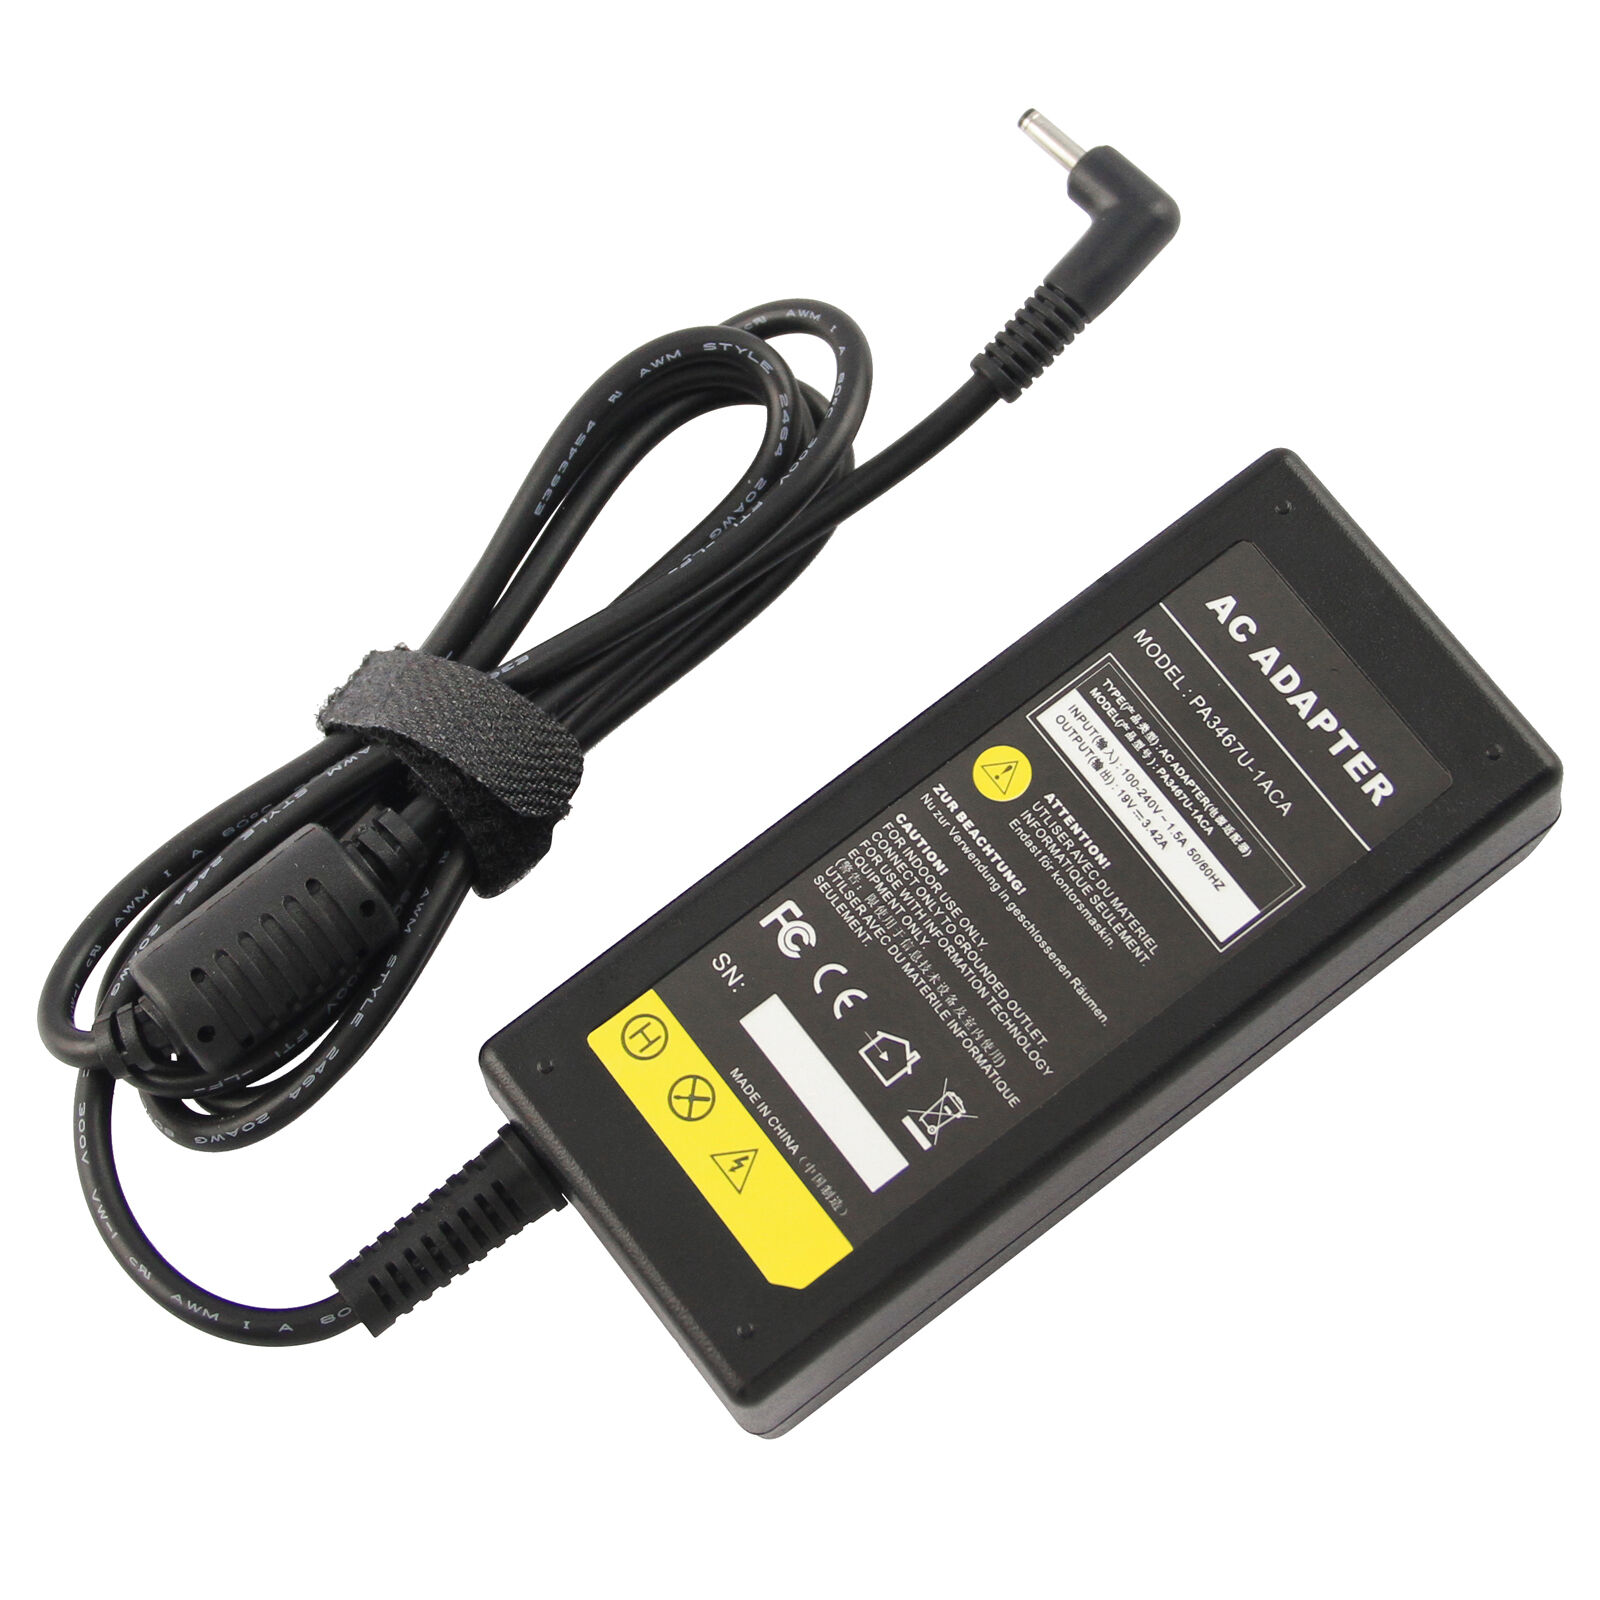 19V 3.42A 65W 3.0mm x 1.1mm tip AC Adapter batter charger for Acer S5 S7 P3 W700